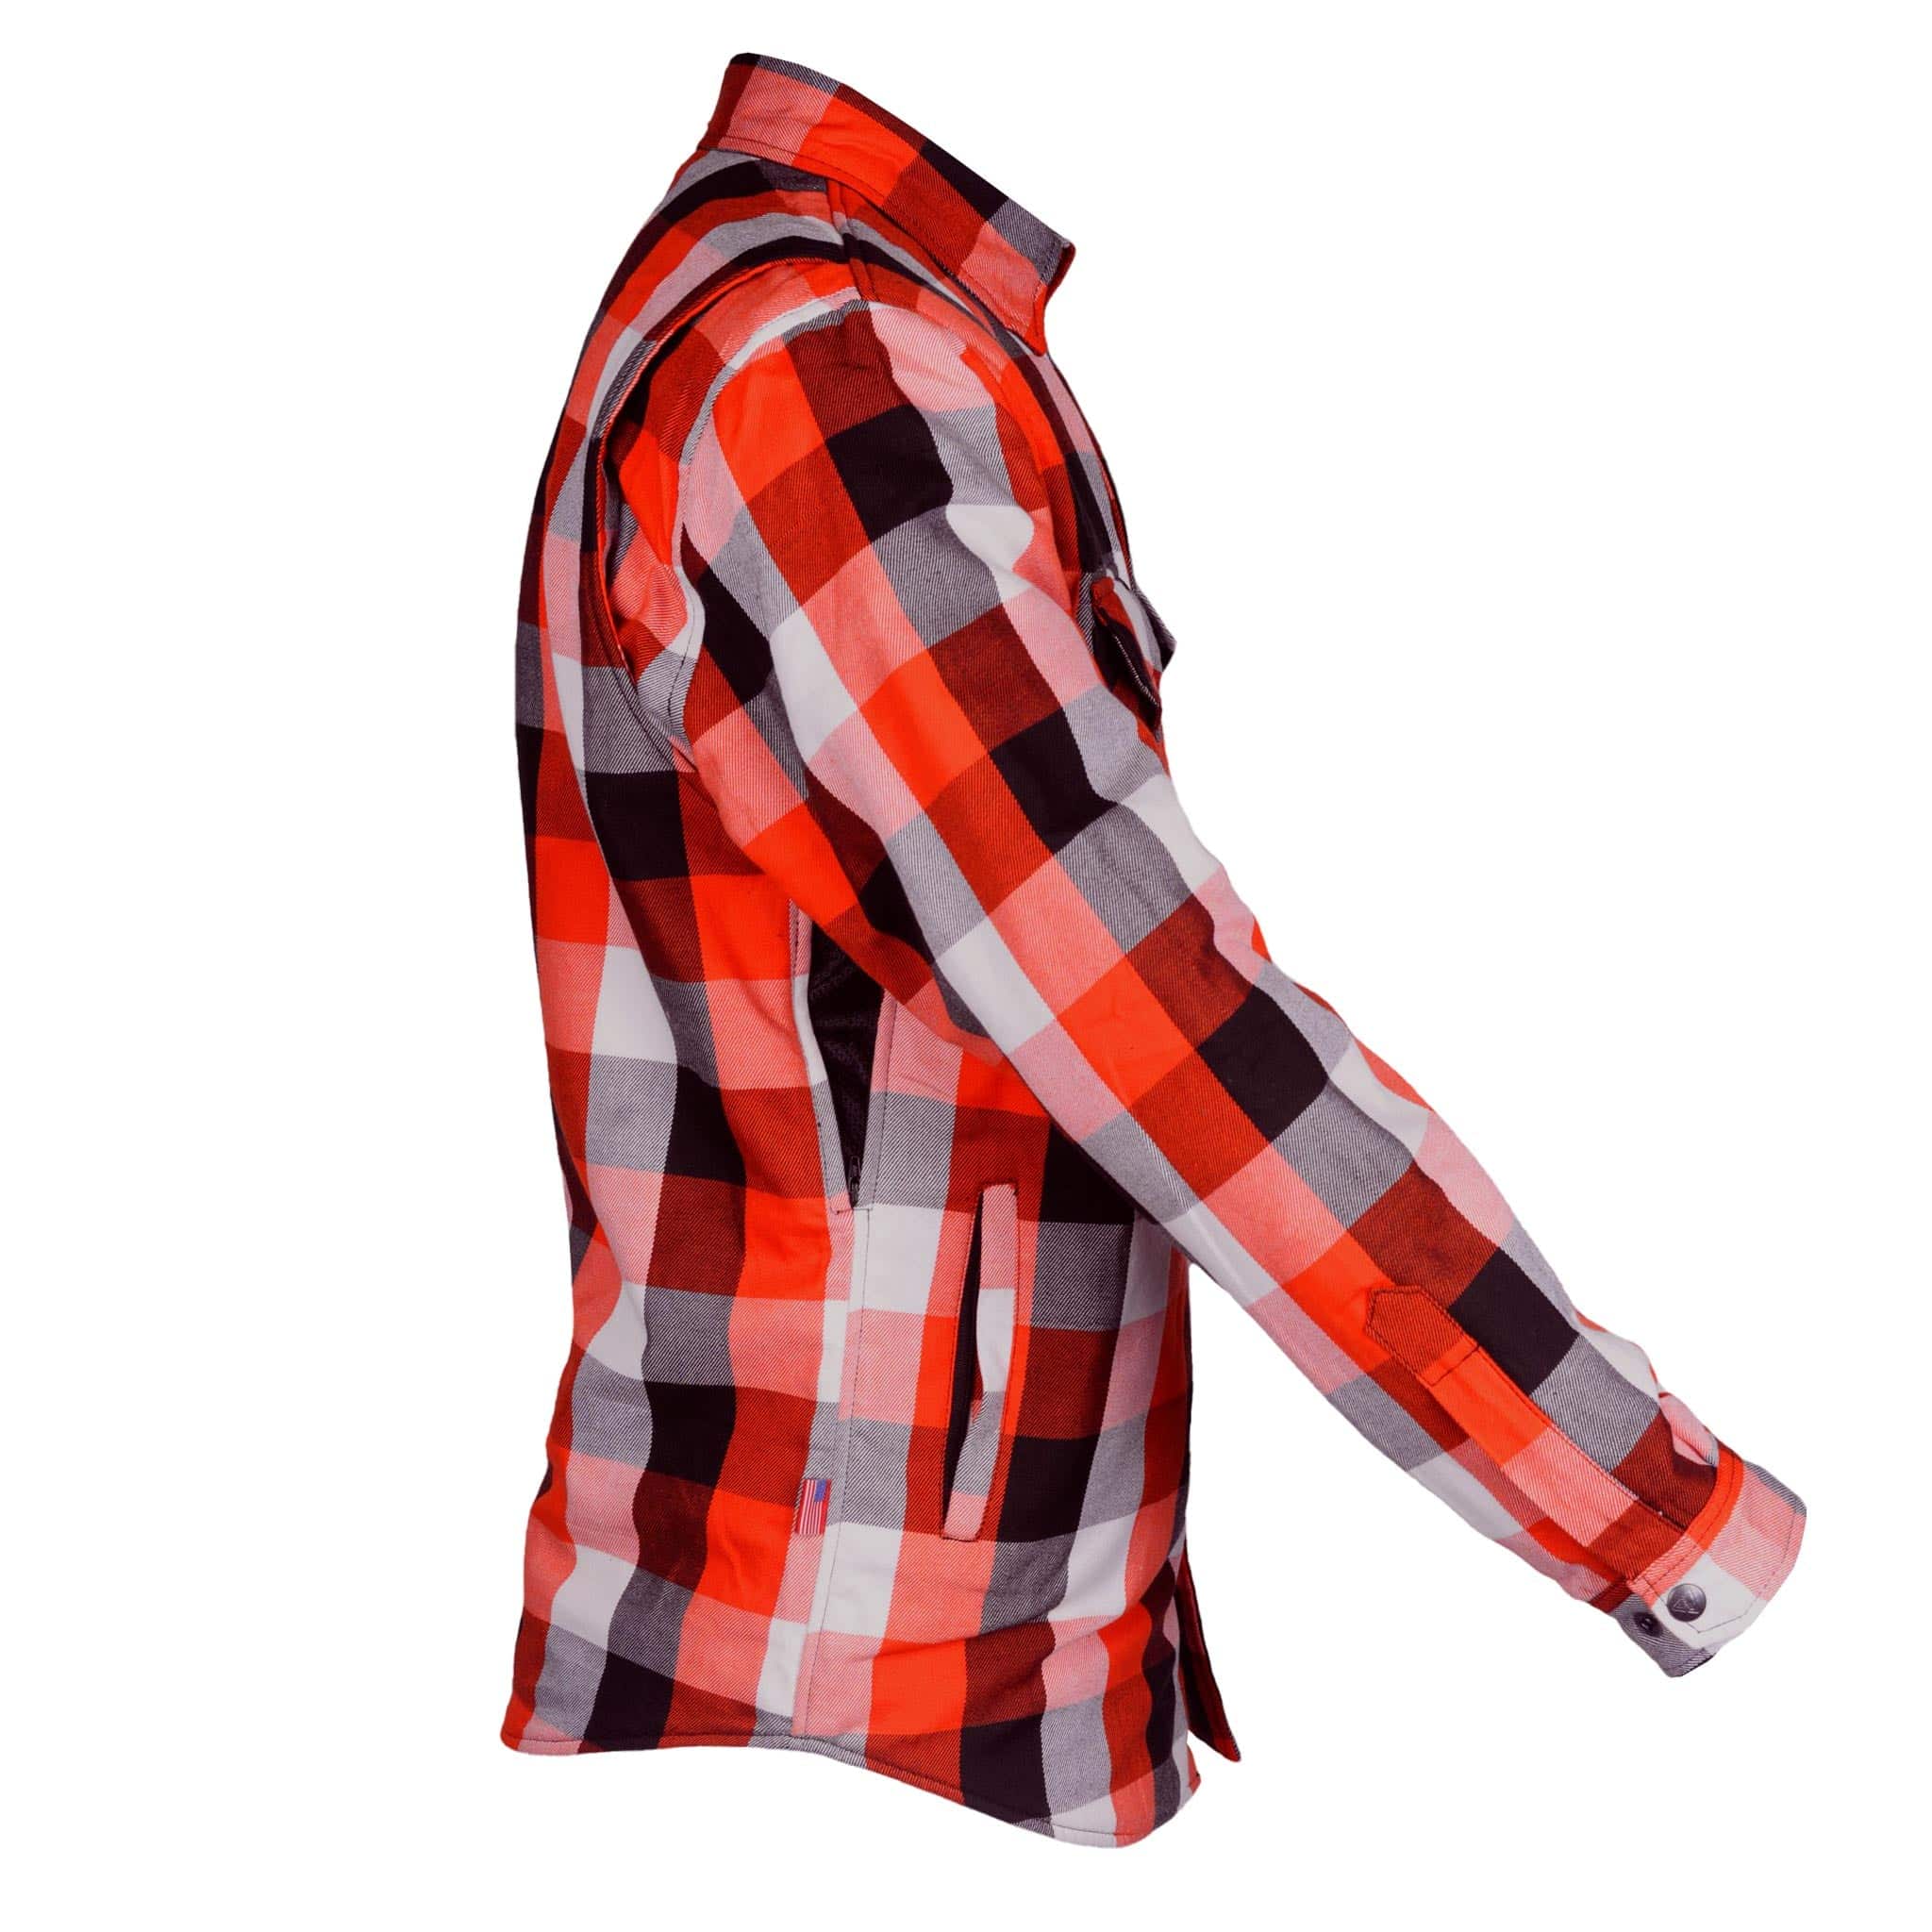 Protective Flannel Shirt "American Dream"  - Red, Black, White Checkered with Pads